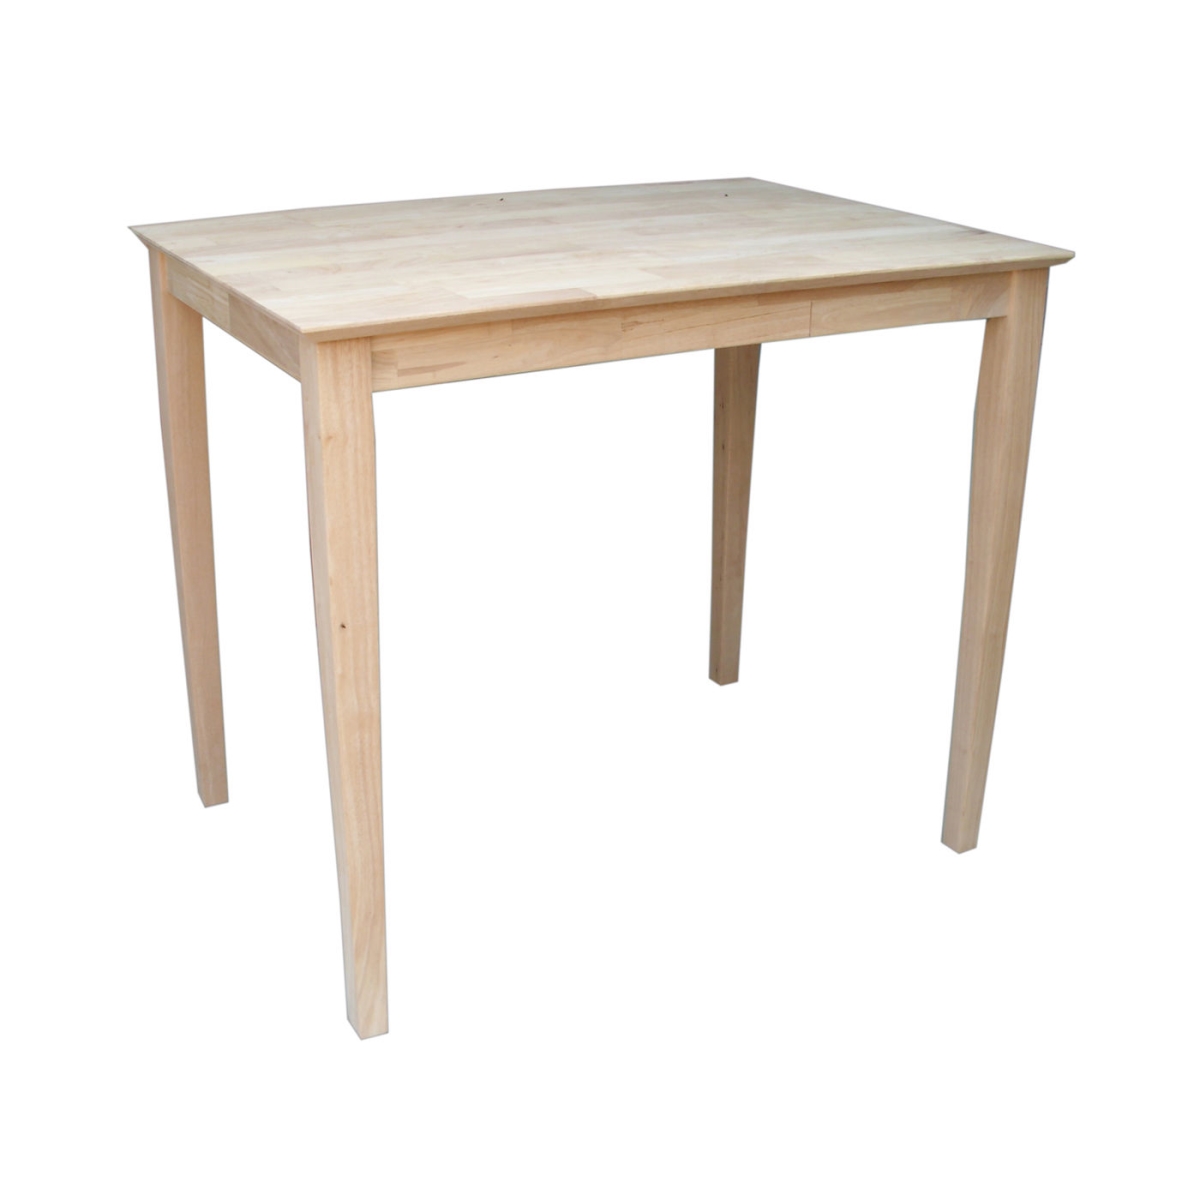 Picture of InternationalConcepts INTC688 Solid Wood Top Table - Shaker Legs